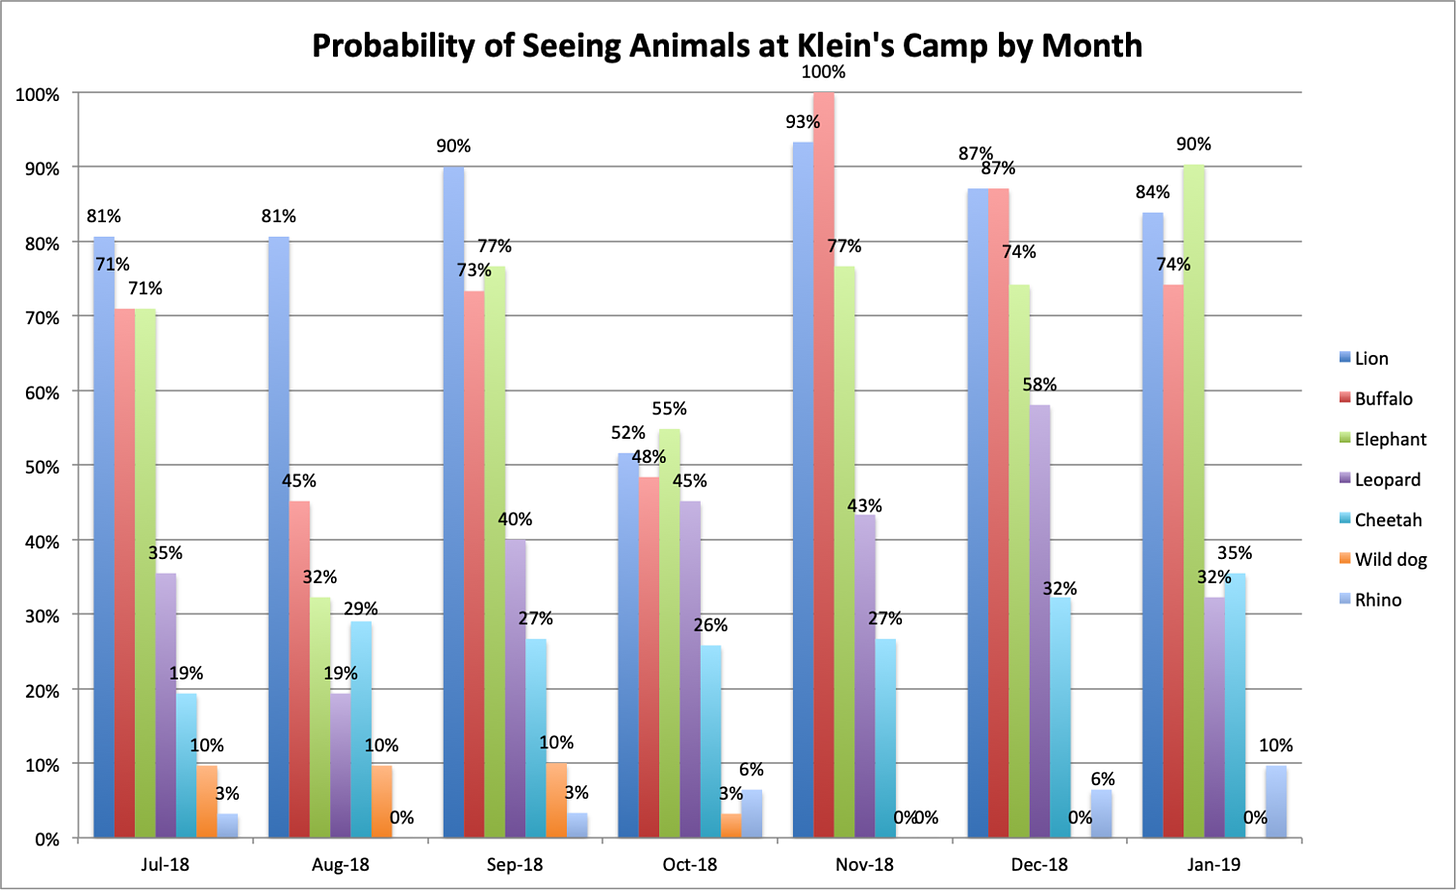 Probability of seeing animals at Klein's Camp by month.png